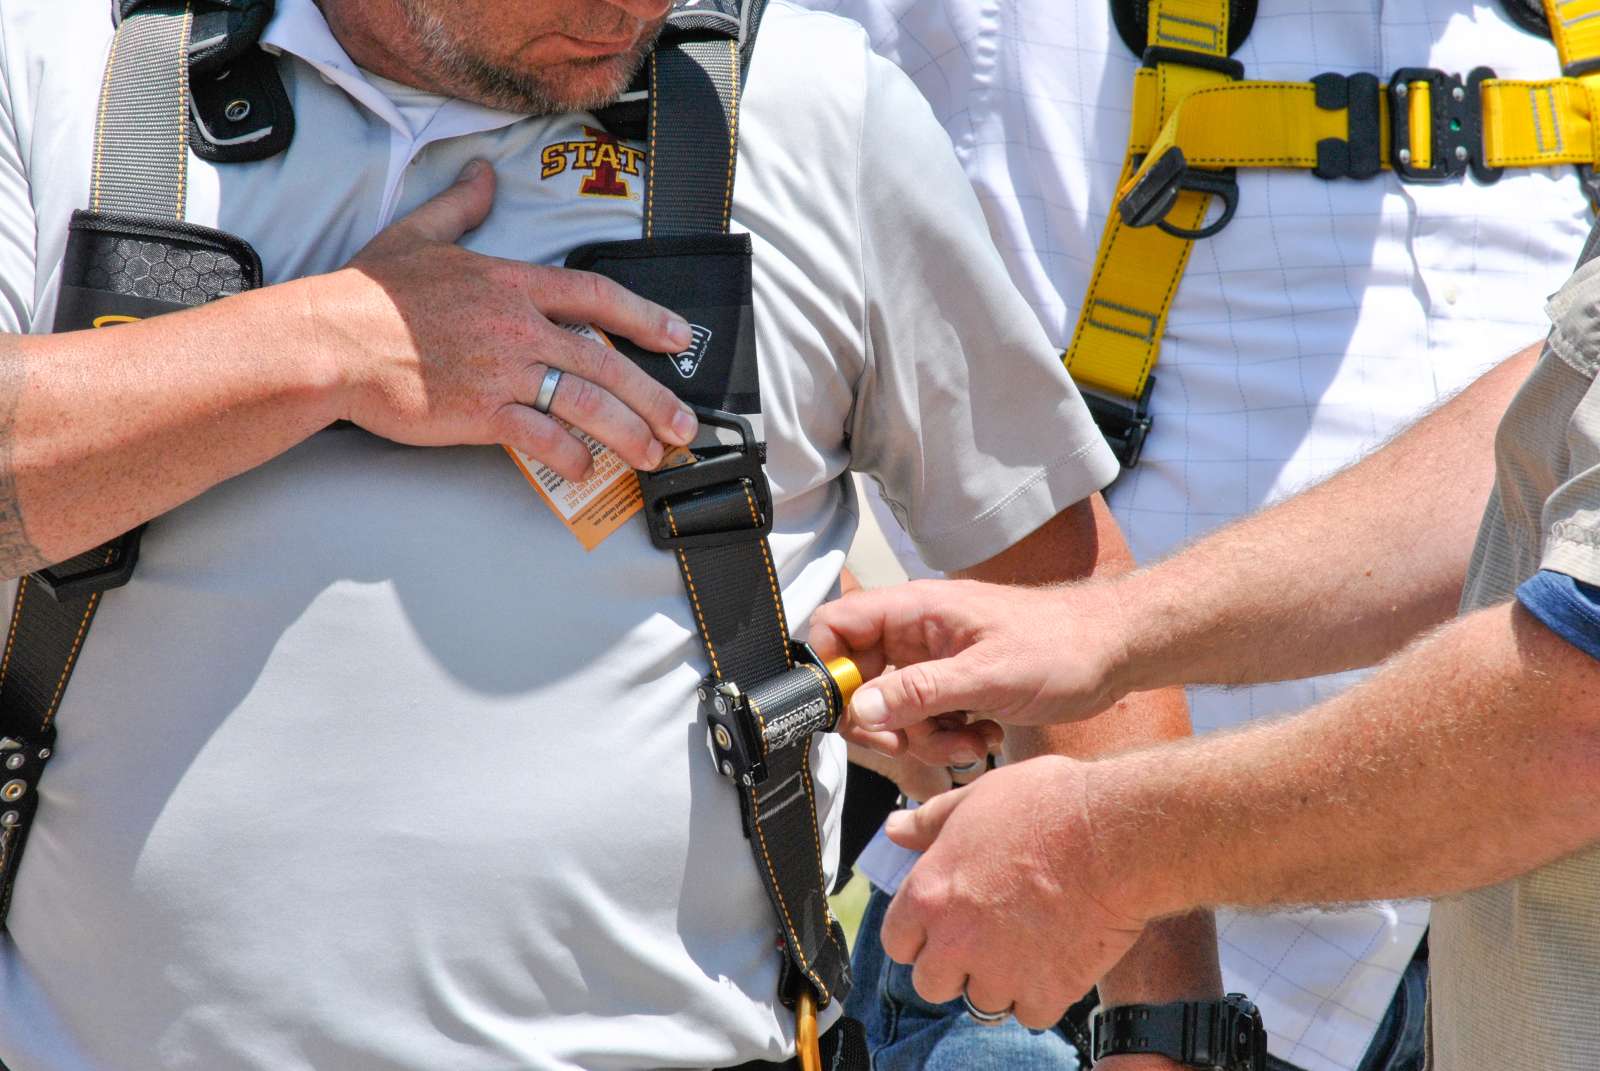 Course instructor demonstrates how to adjust a fall protection body harness.